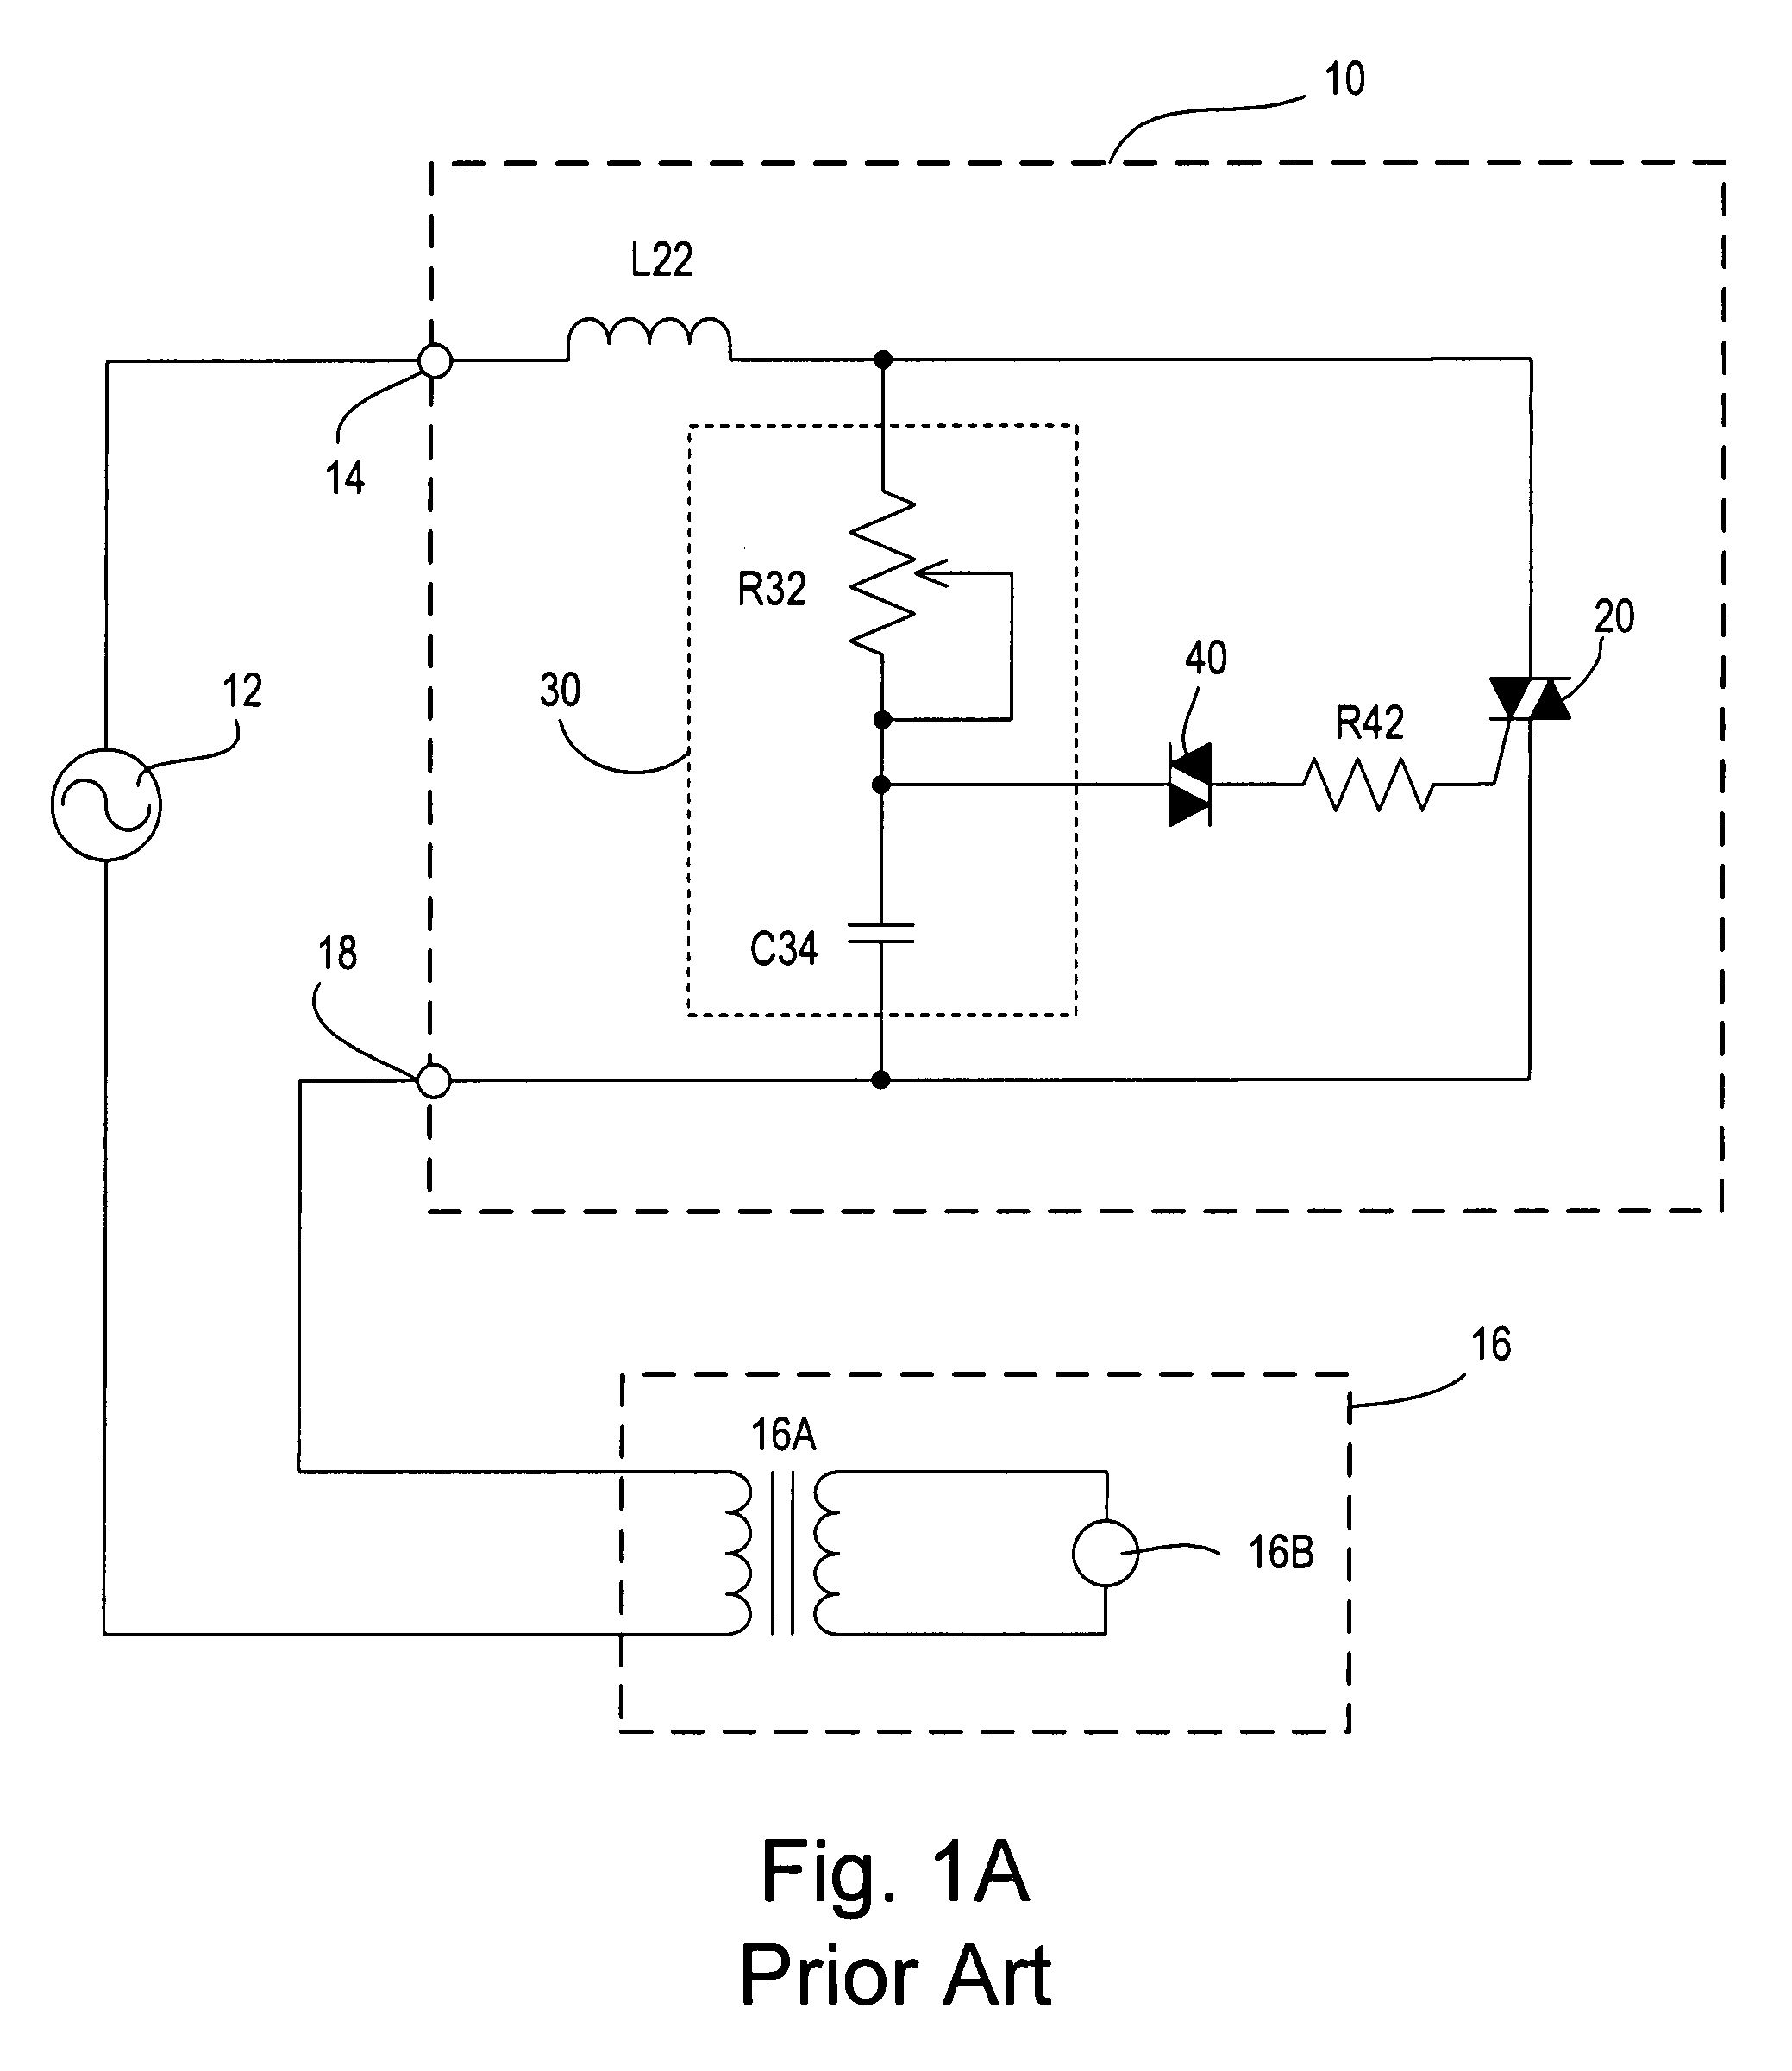 Method and apparatus for preventing multiple attempted firings of a semiconductor switch in a load control device